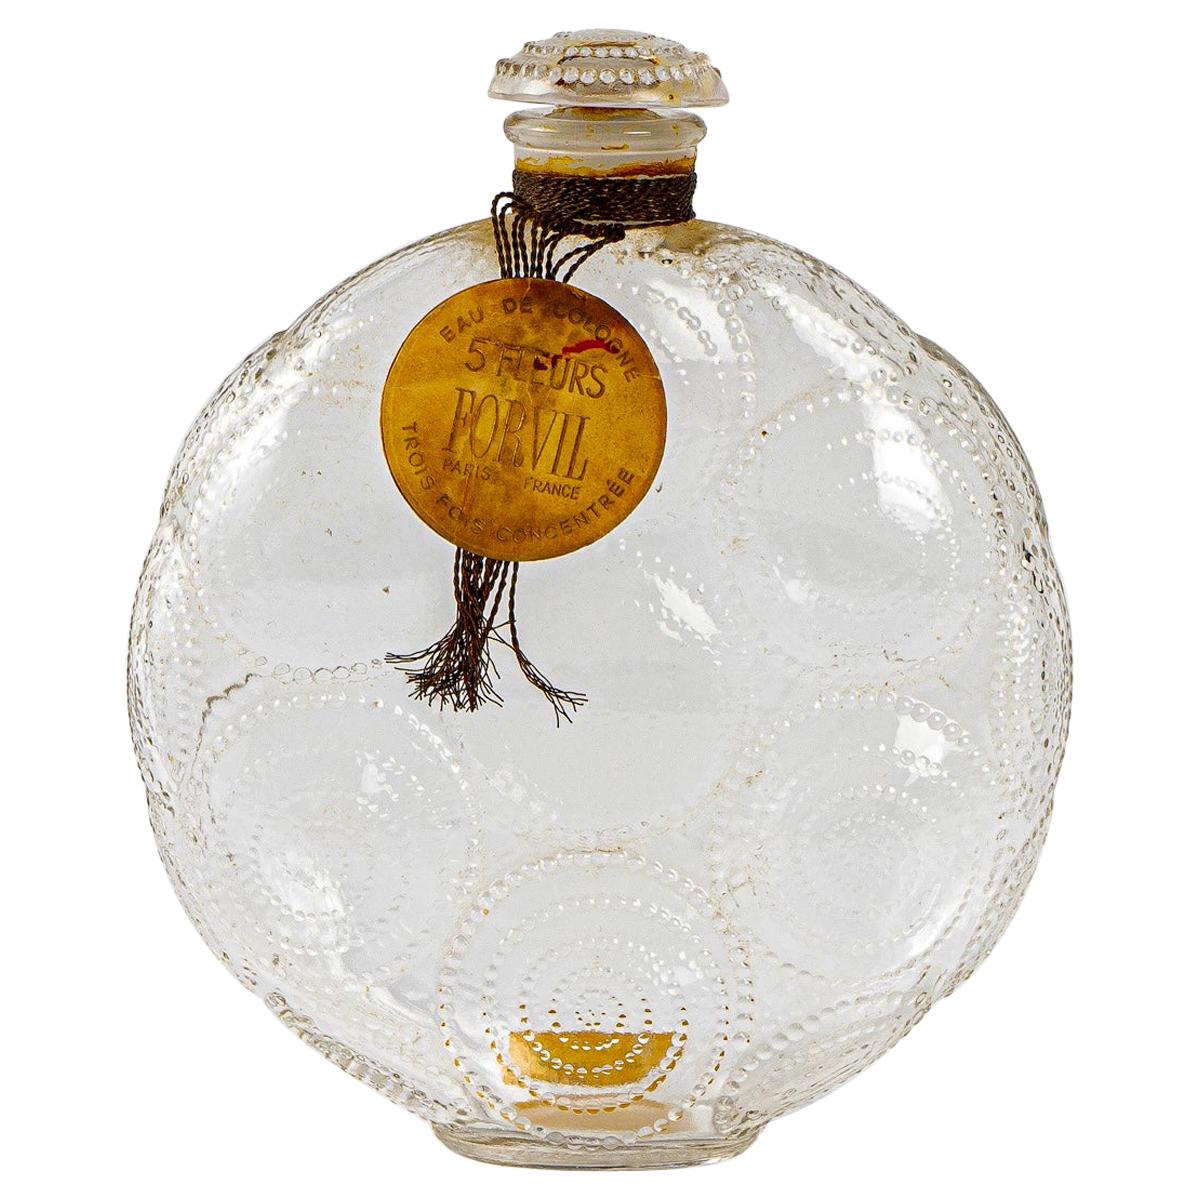 Do Lalique products always have a signature?